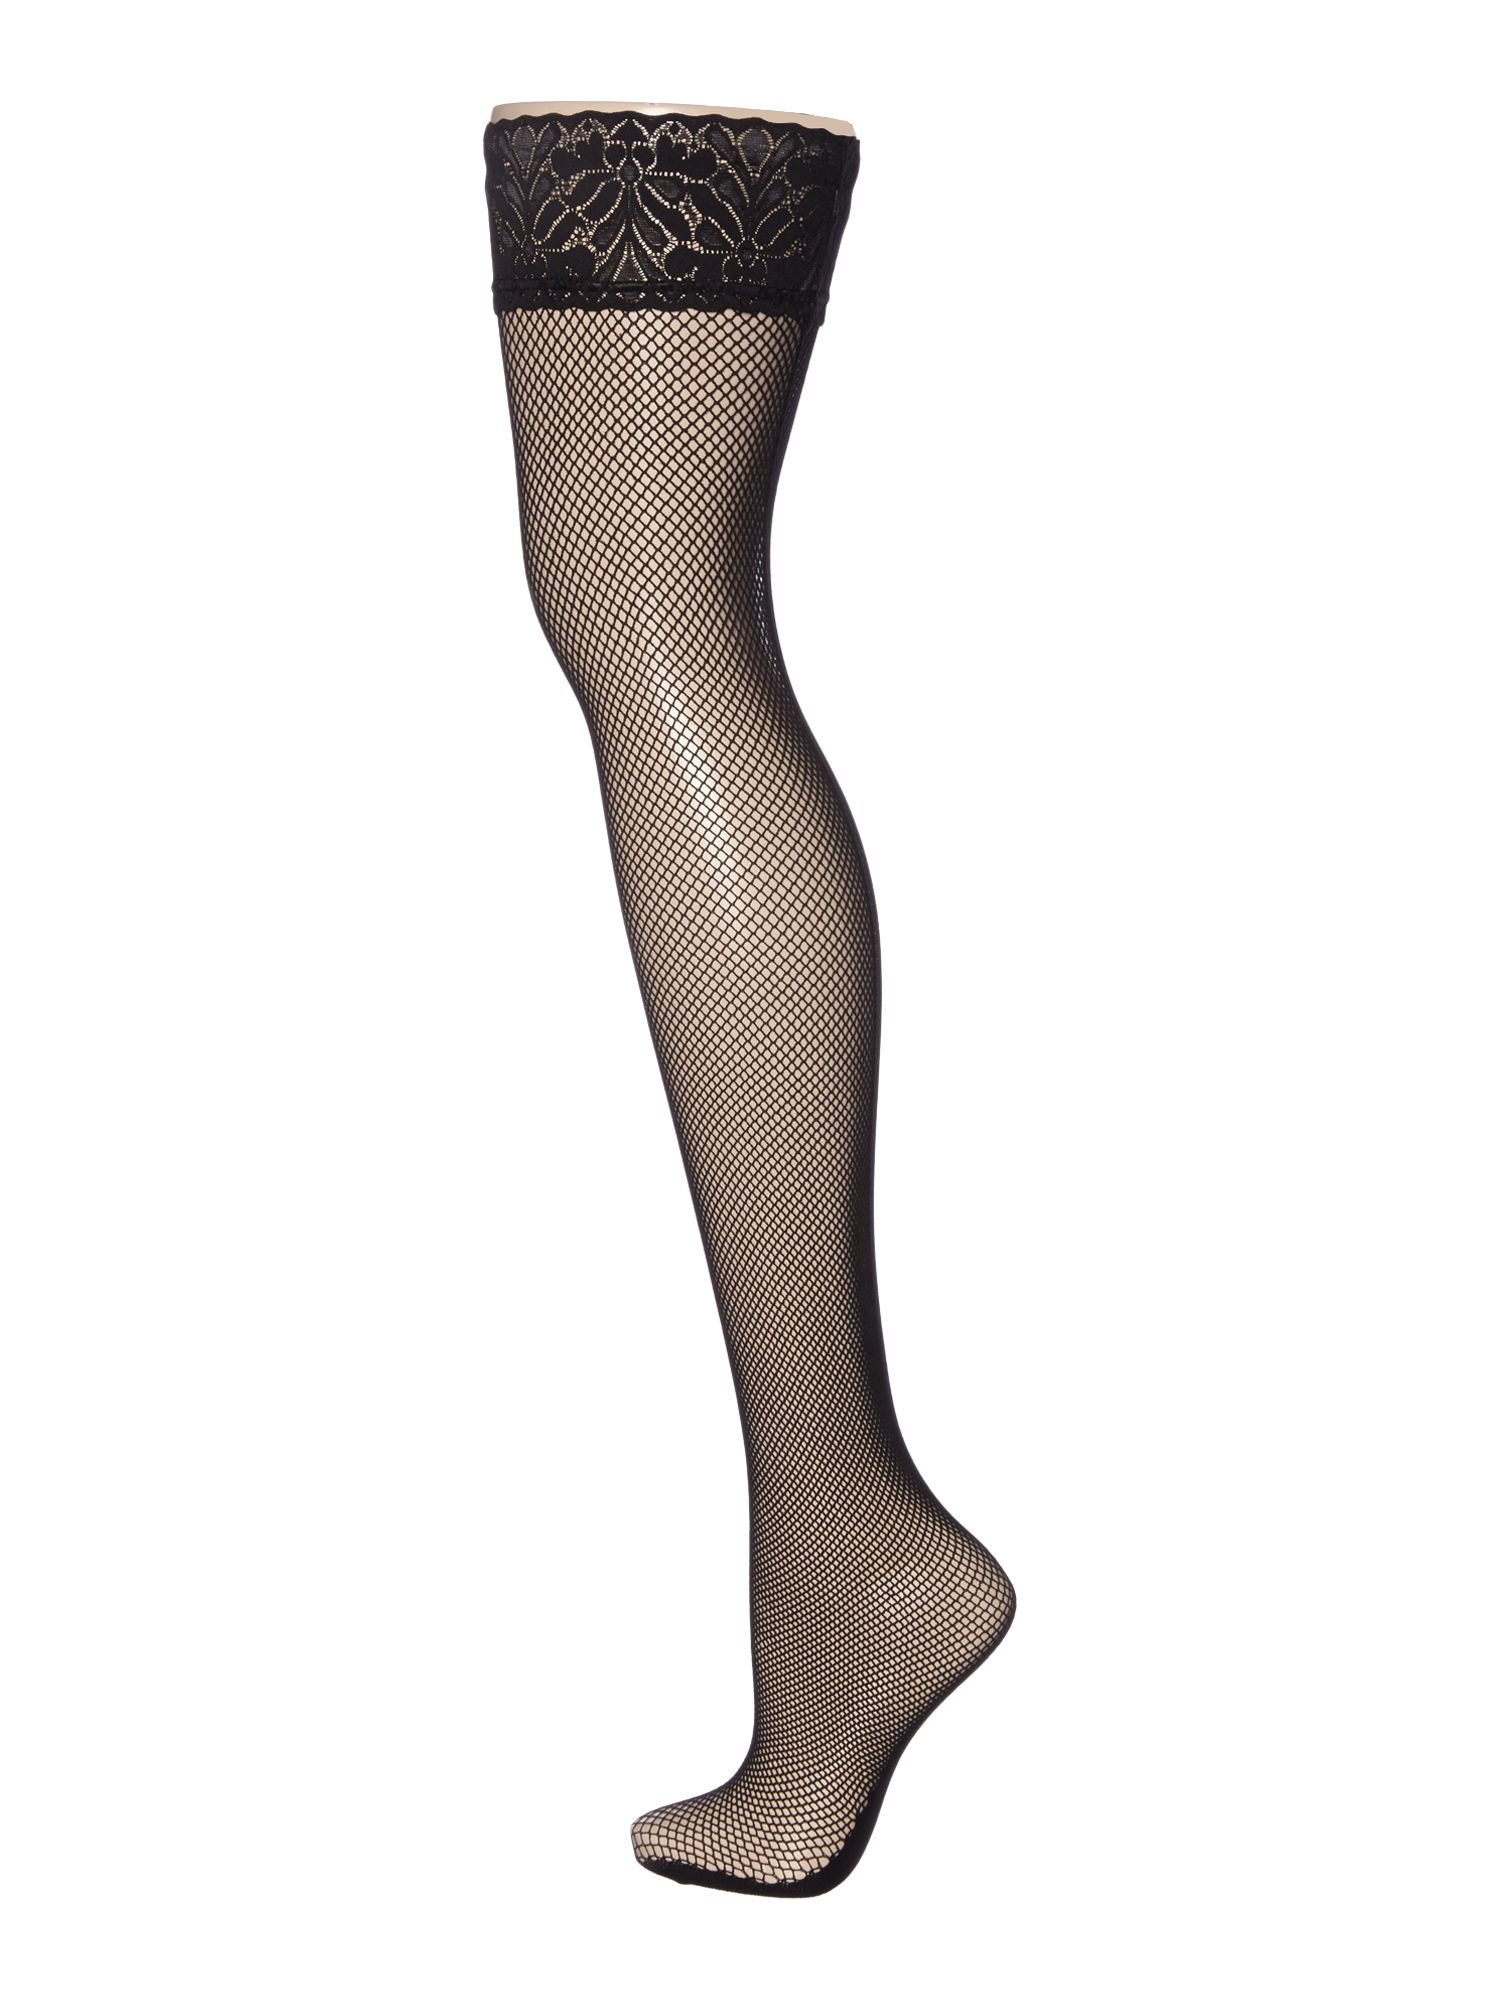 Jonathan aston Fishnet Lace Top Hold Ups in Black | Lyst